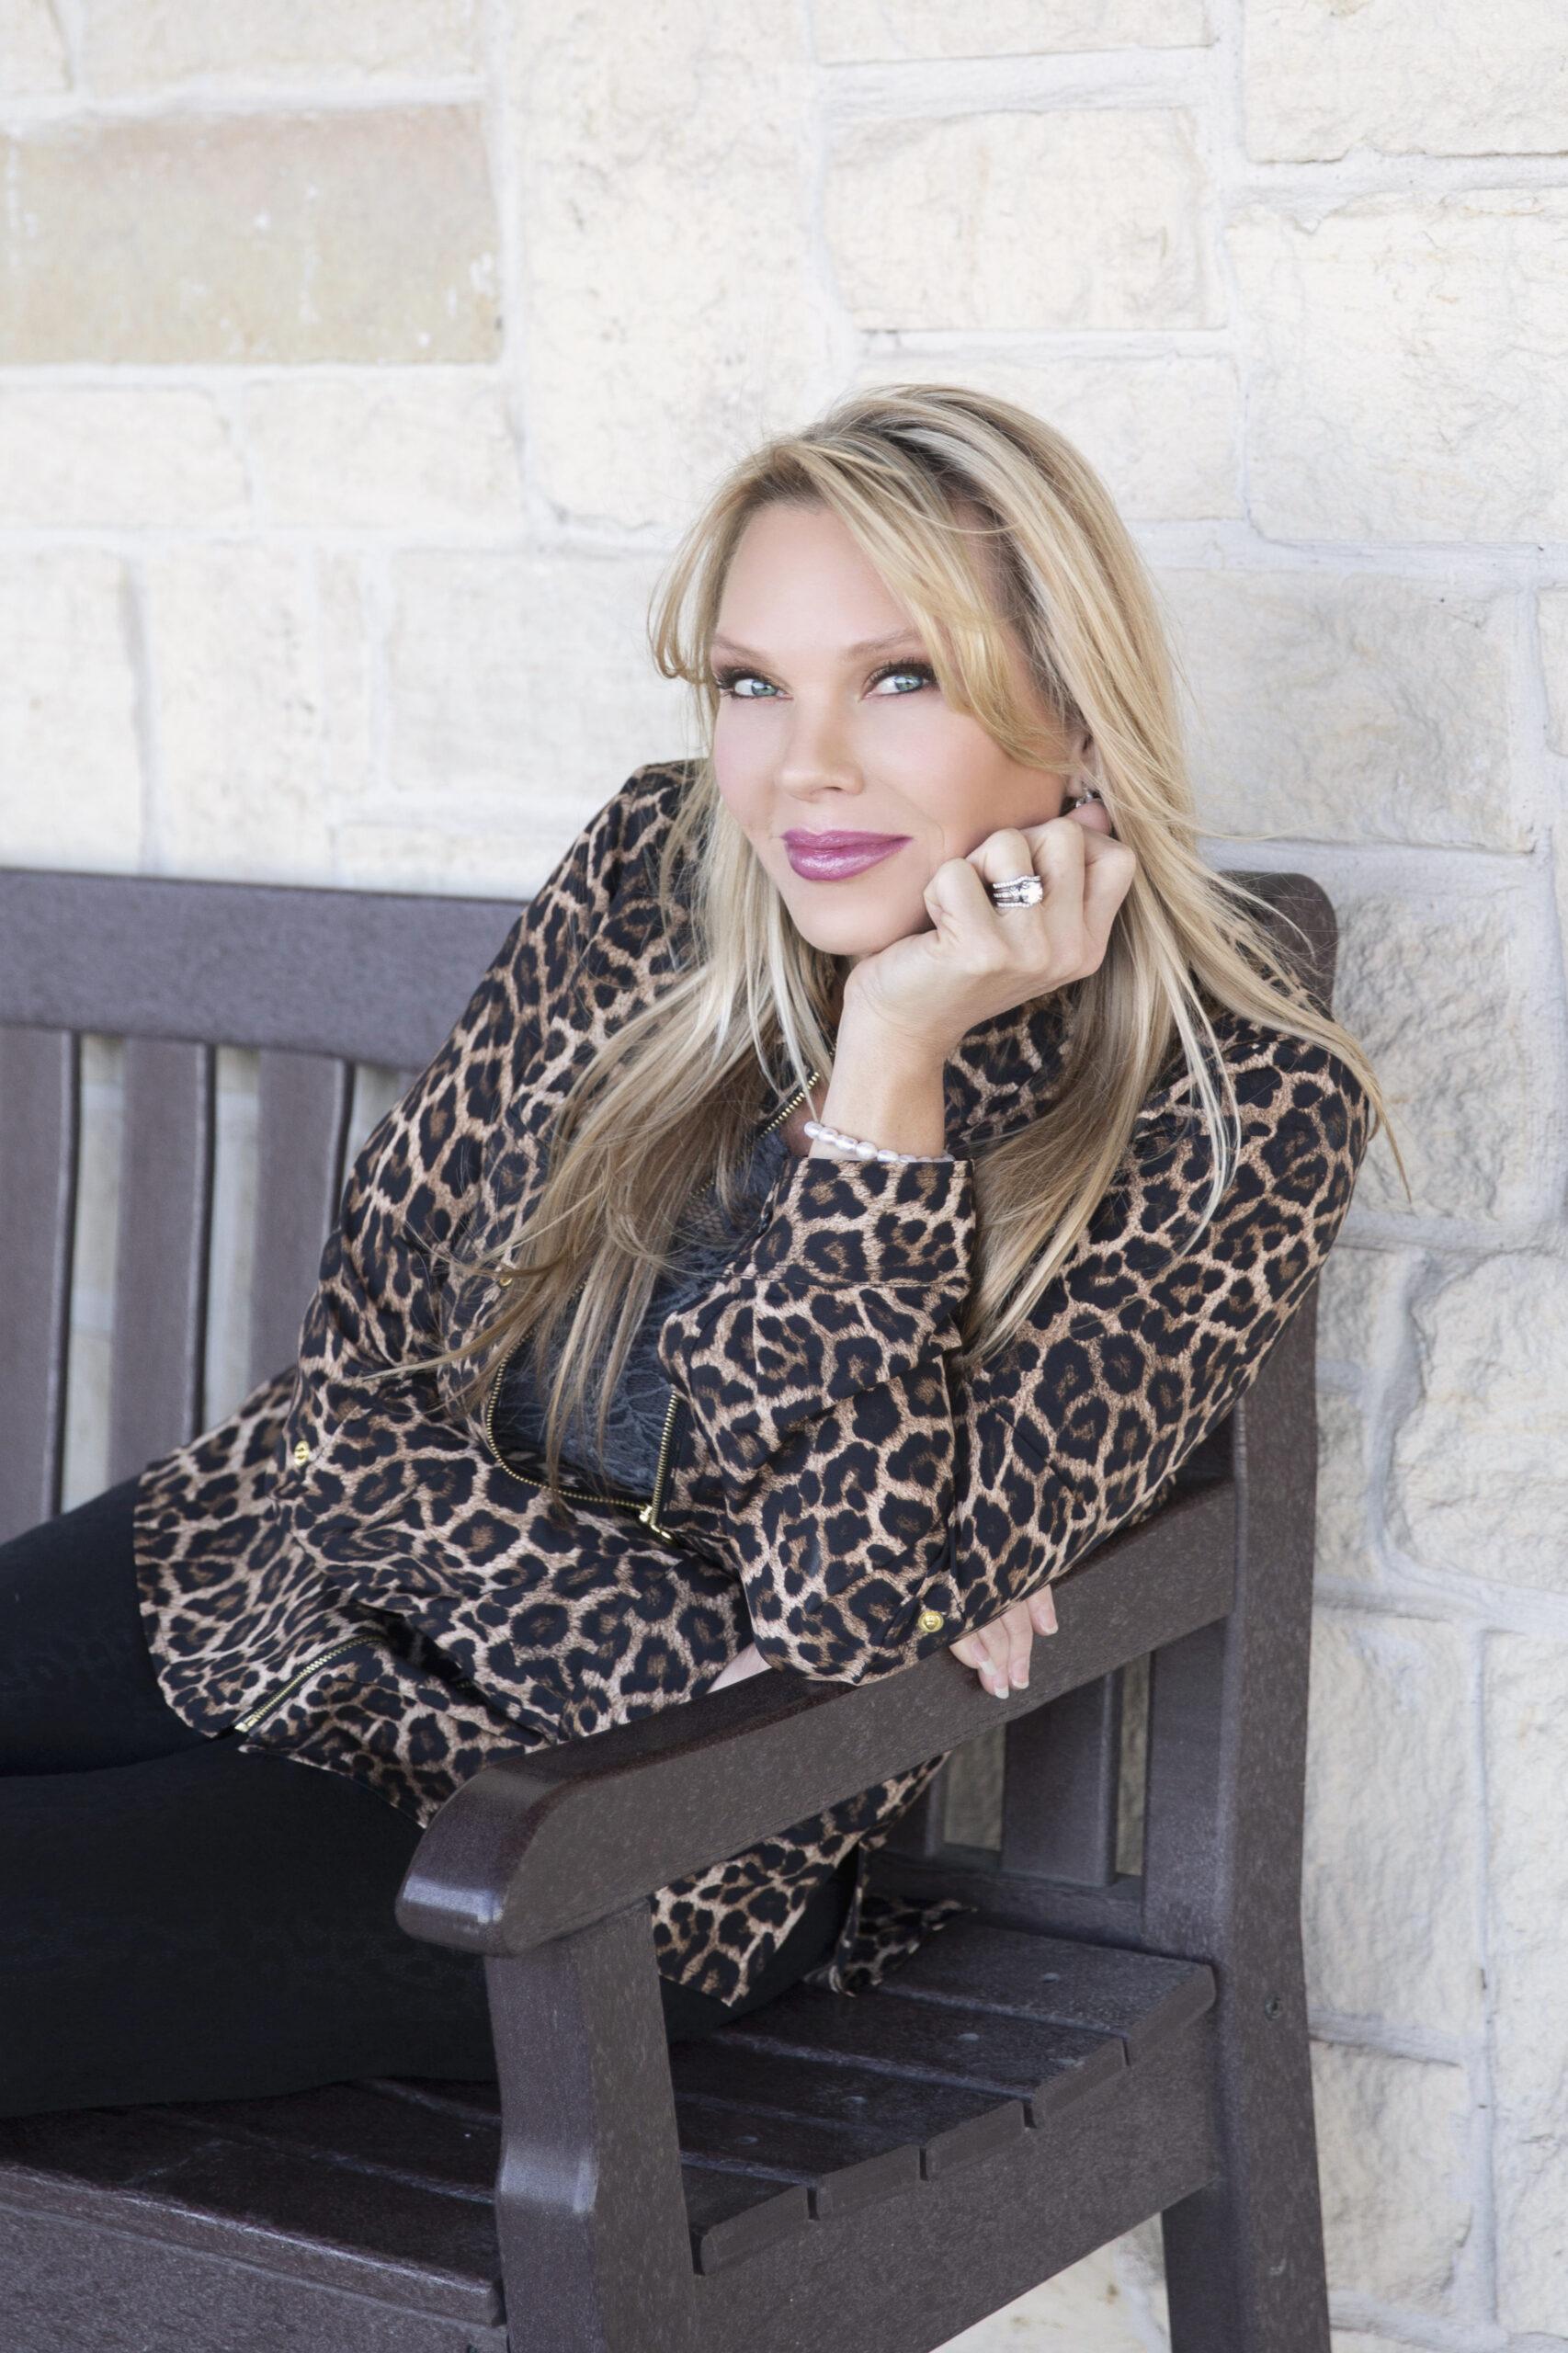 A woman in a leopard print jacket sitting on a bench with her hand on her cheek.